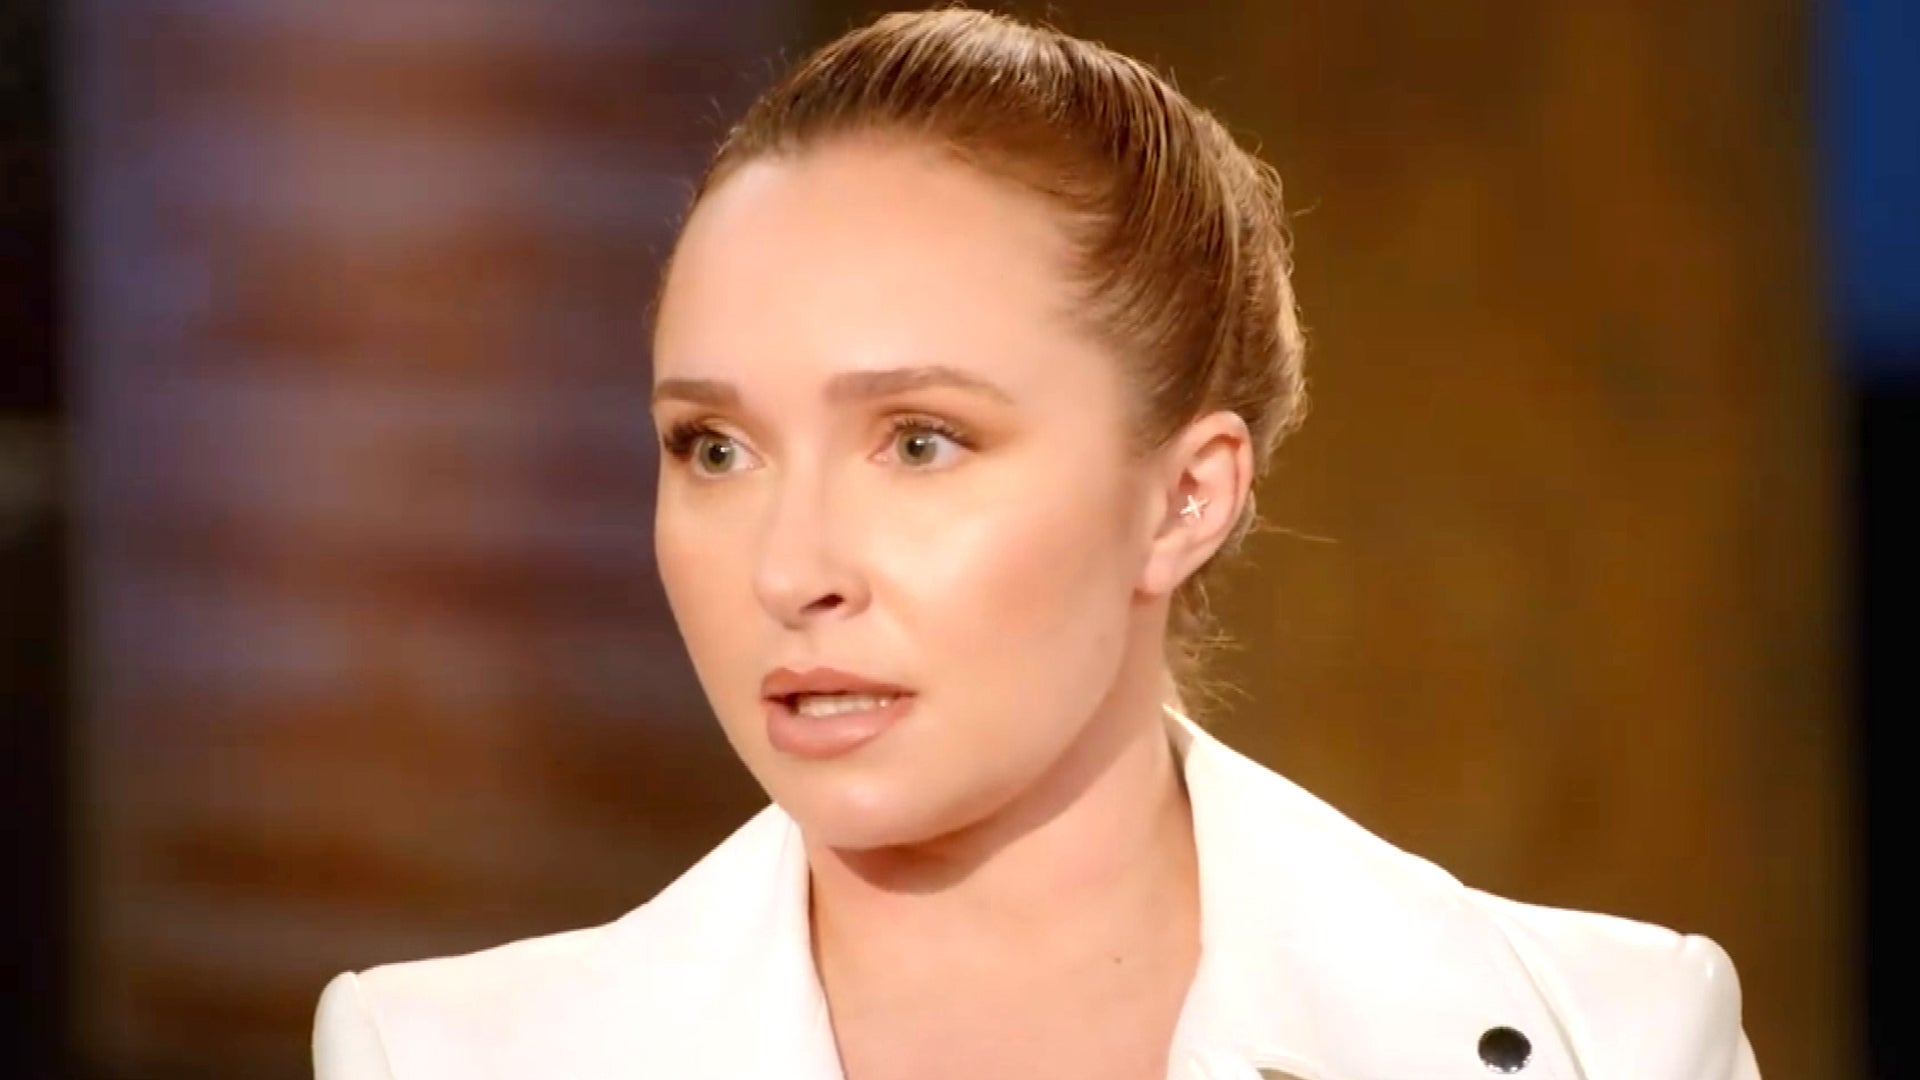 Hayden Panettiere Was Given a 'Happy Pill' for the Red Carpet Age 16 | Entertainment Tonight